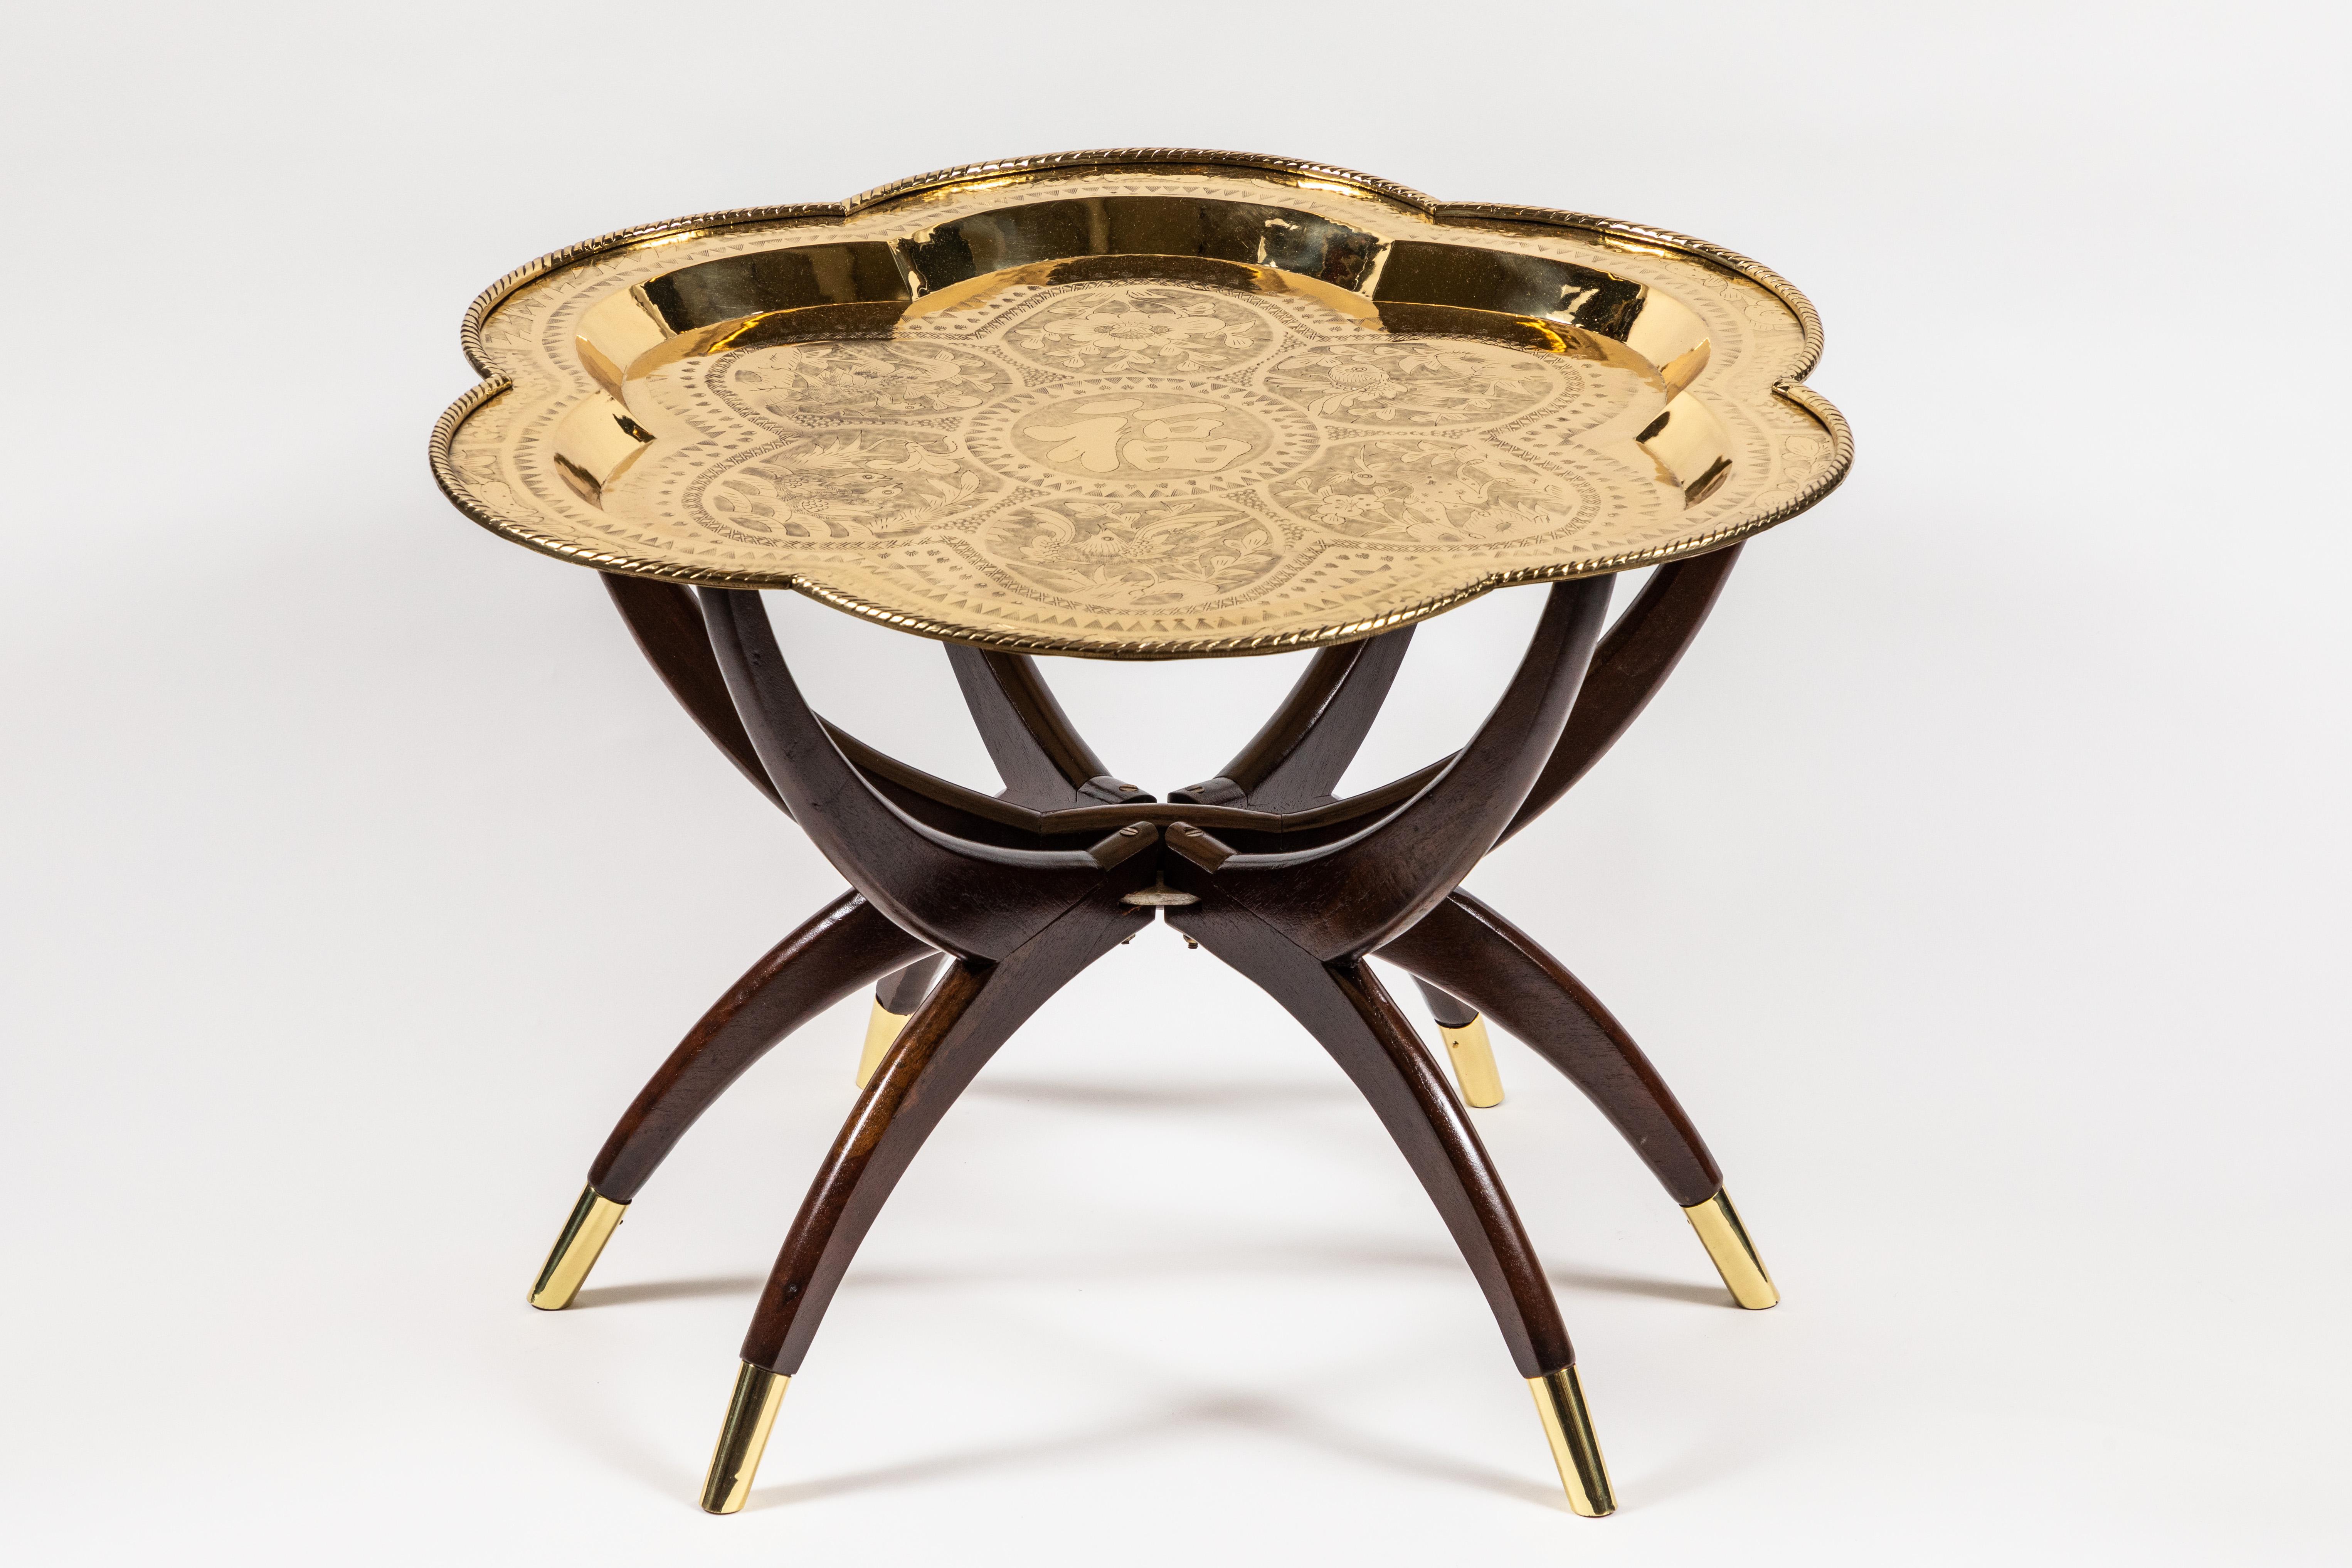 This little mid-century folding tray table with brass tipped spider legs and flower-shaped tray has a lot of character and interest. Newly refinished and polished, the hinged spider base supports a tray engraved with flora and fauna, rabbits and